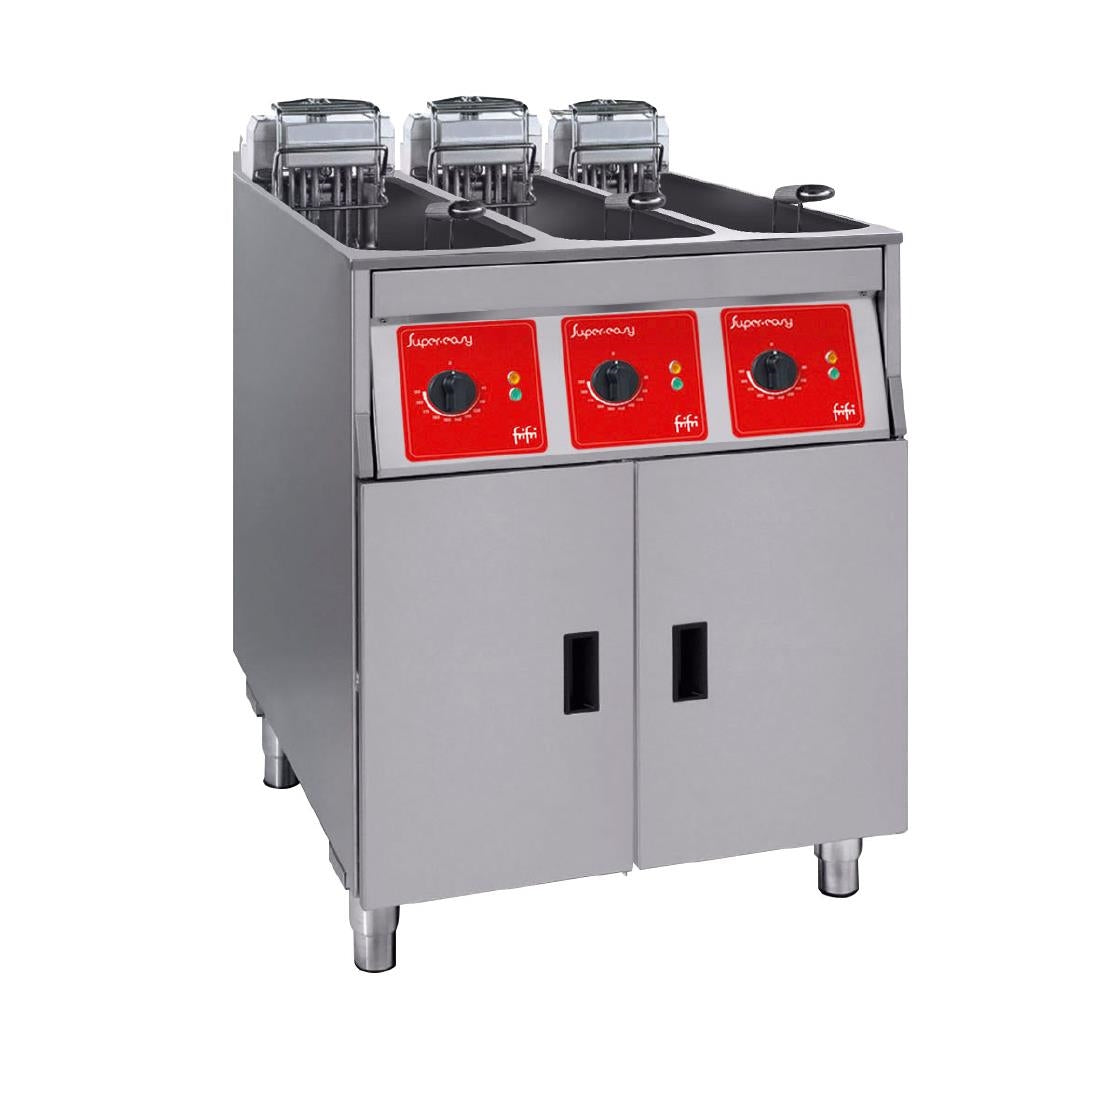 HS073-3PH FriFri Super Easy 633 Electric Free-standing Fryer Triple Tank Triple Basket with Filtration 22.5kW Three Phase